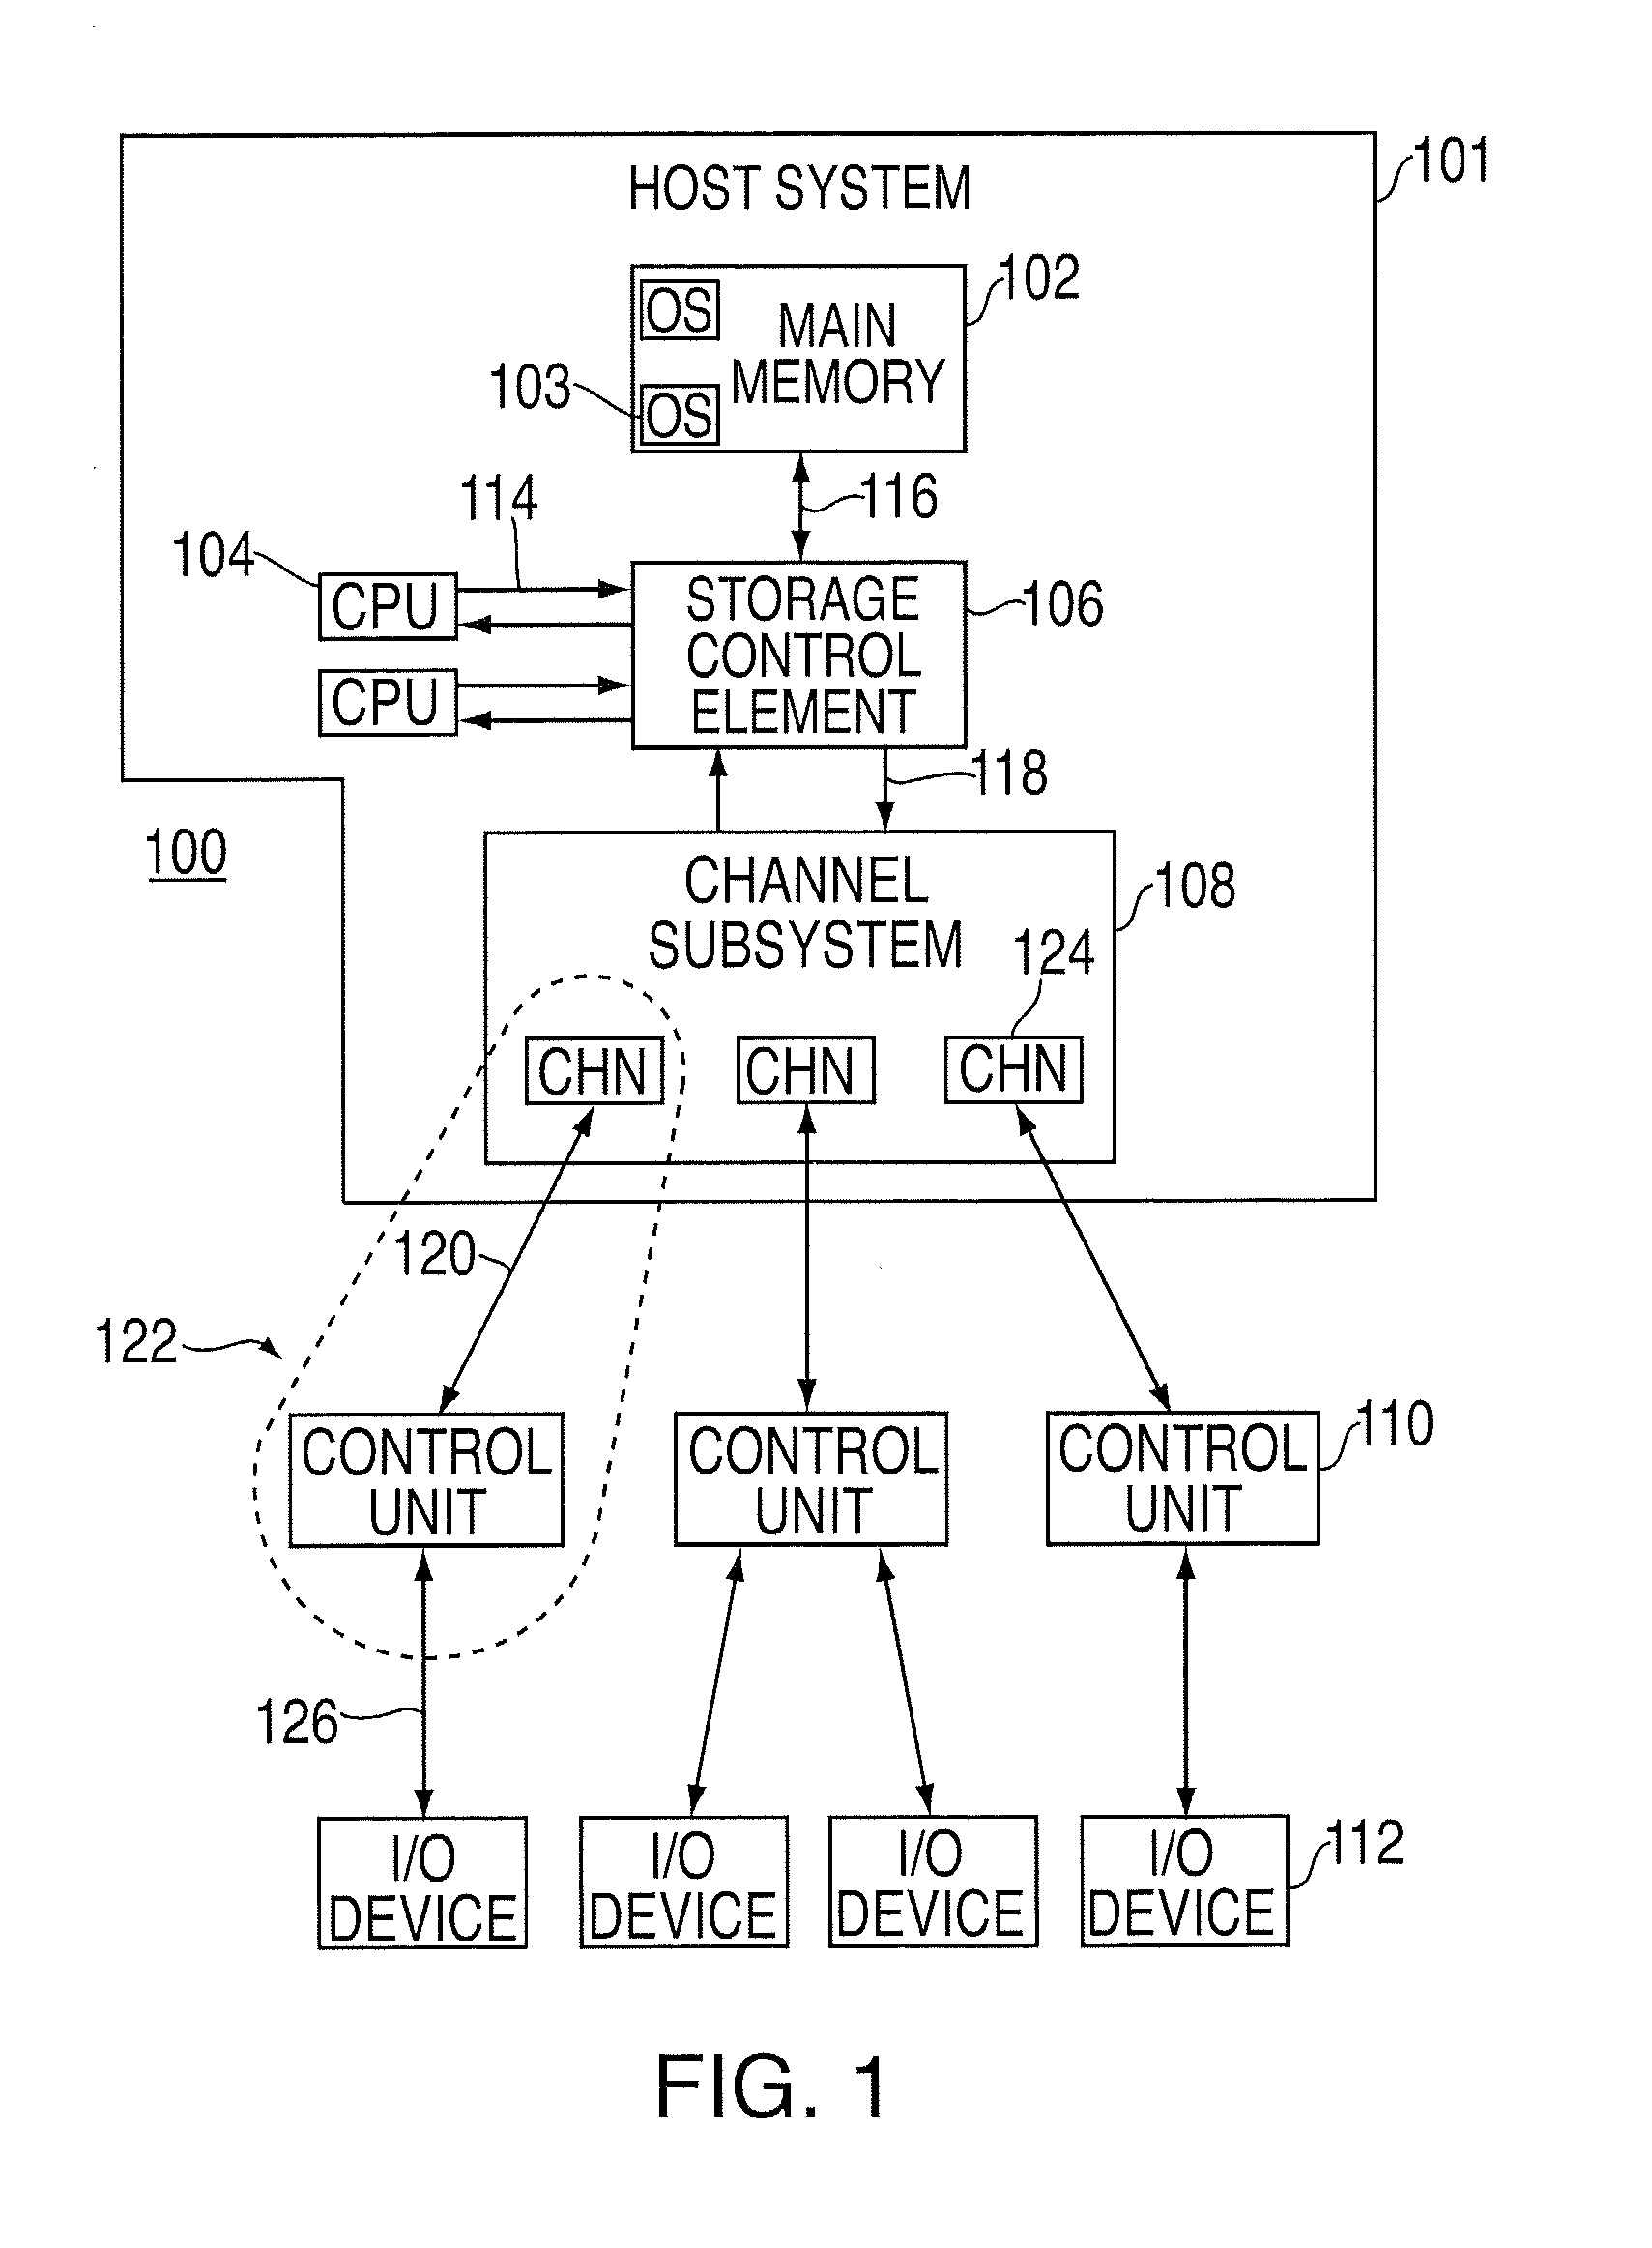 Providing indirect data addressing in an input/output processing system where the indirect data address list is non-contiguous